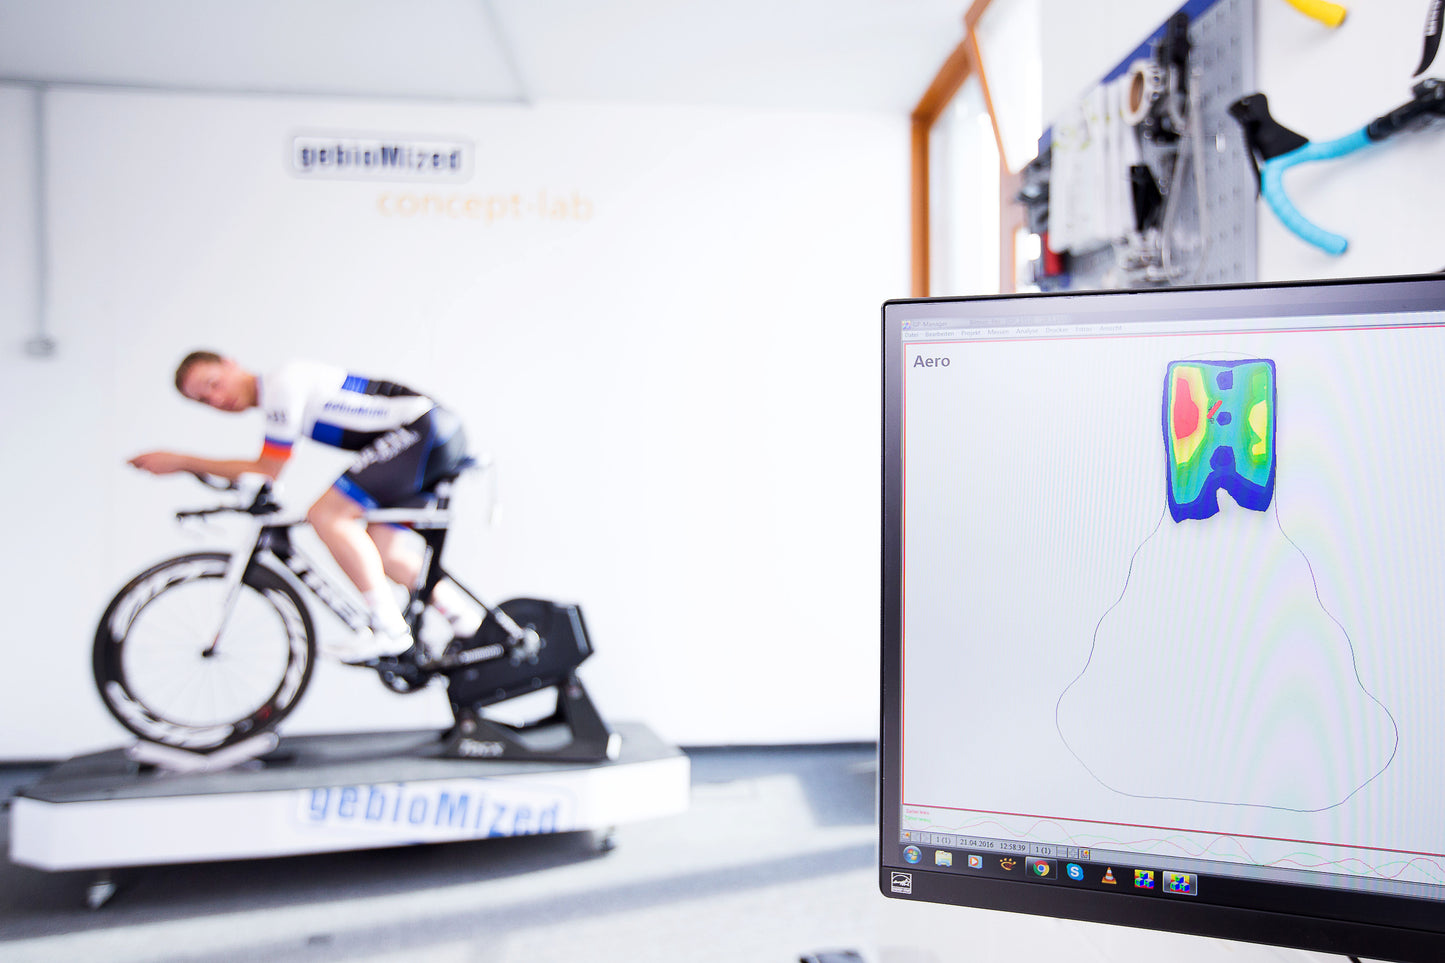 gebioMized Saddle Pressure Mapping Technology